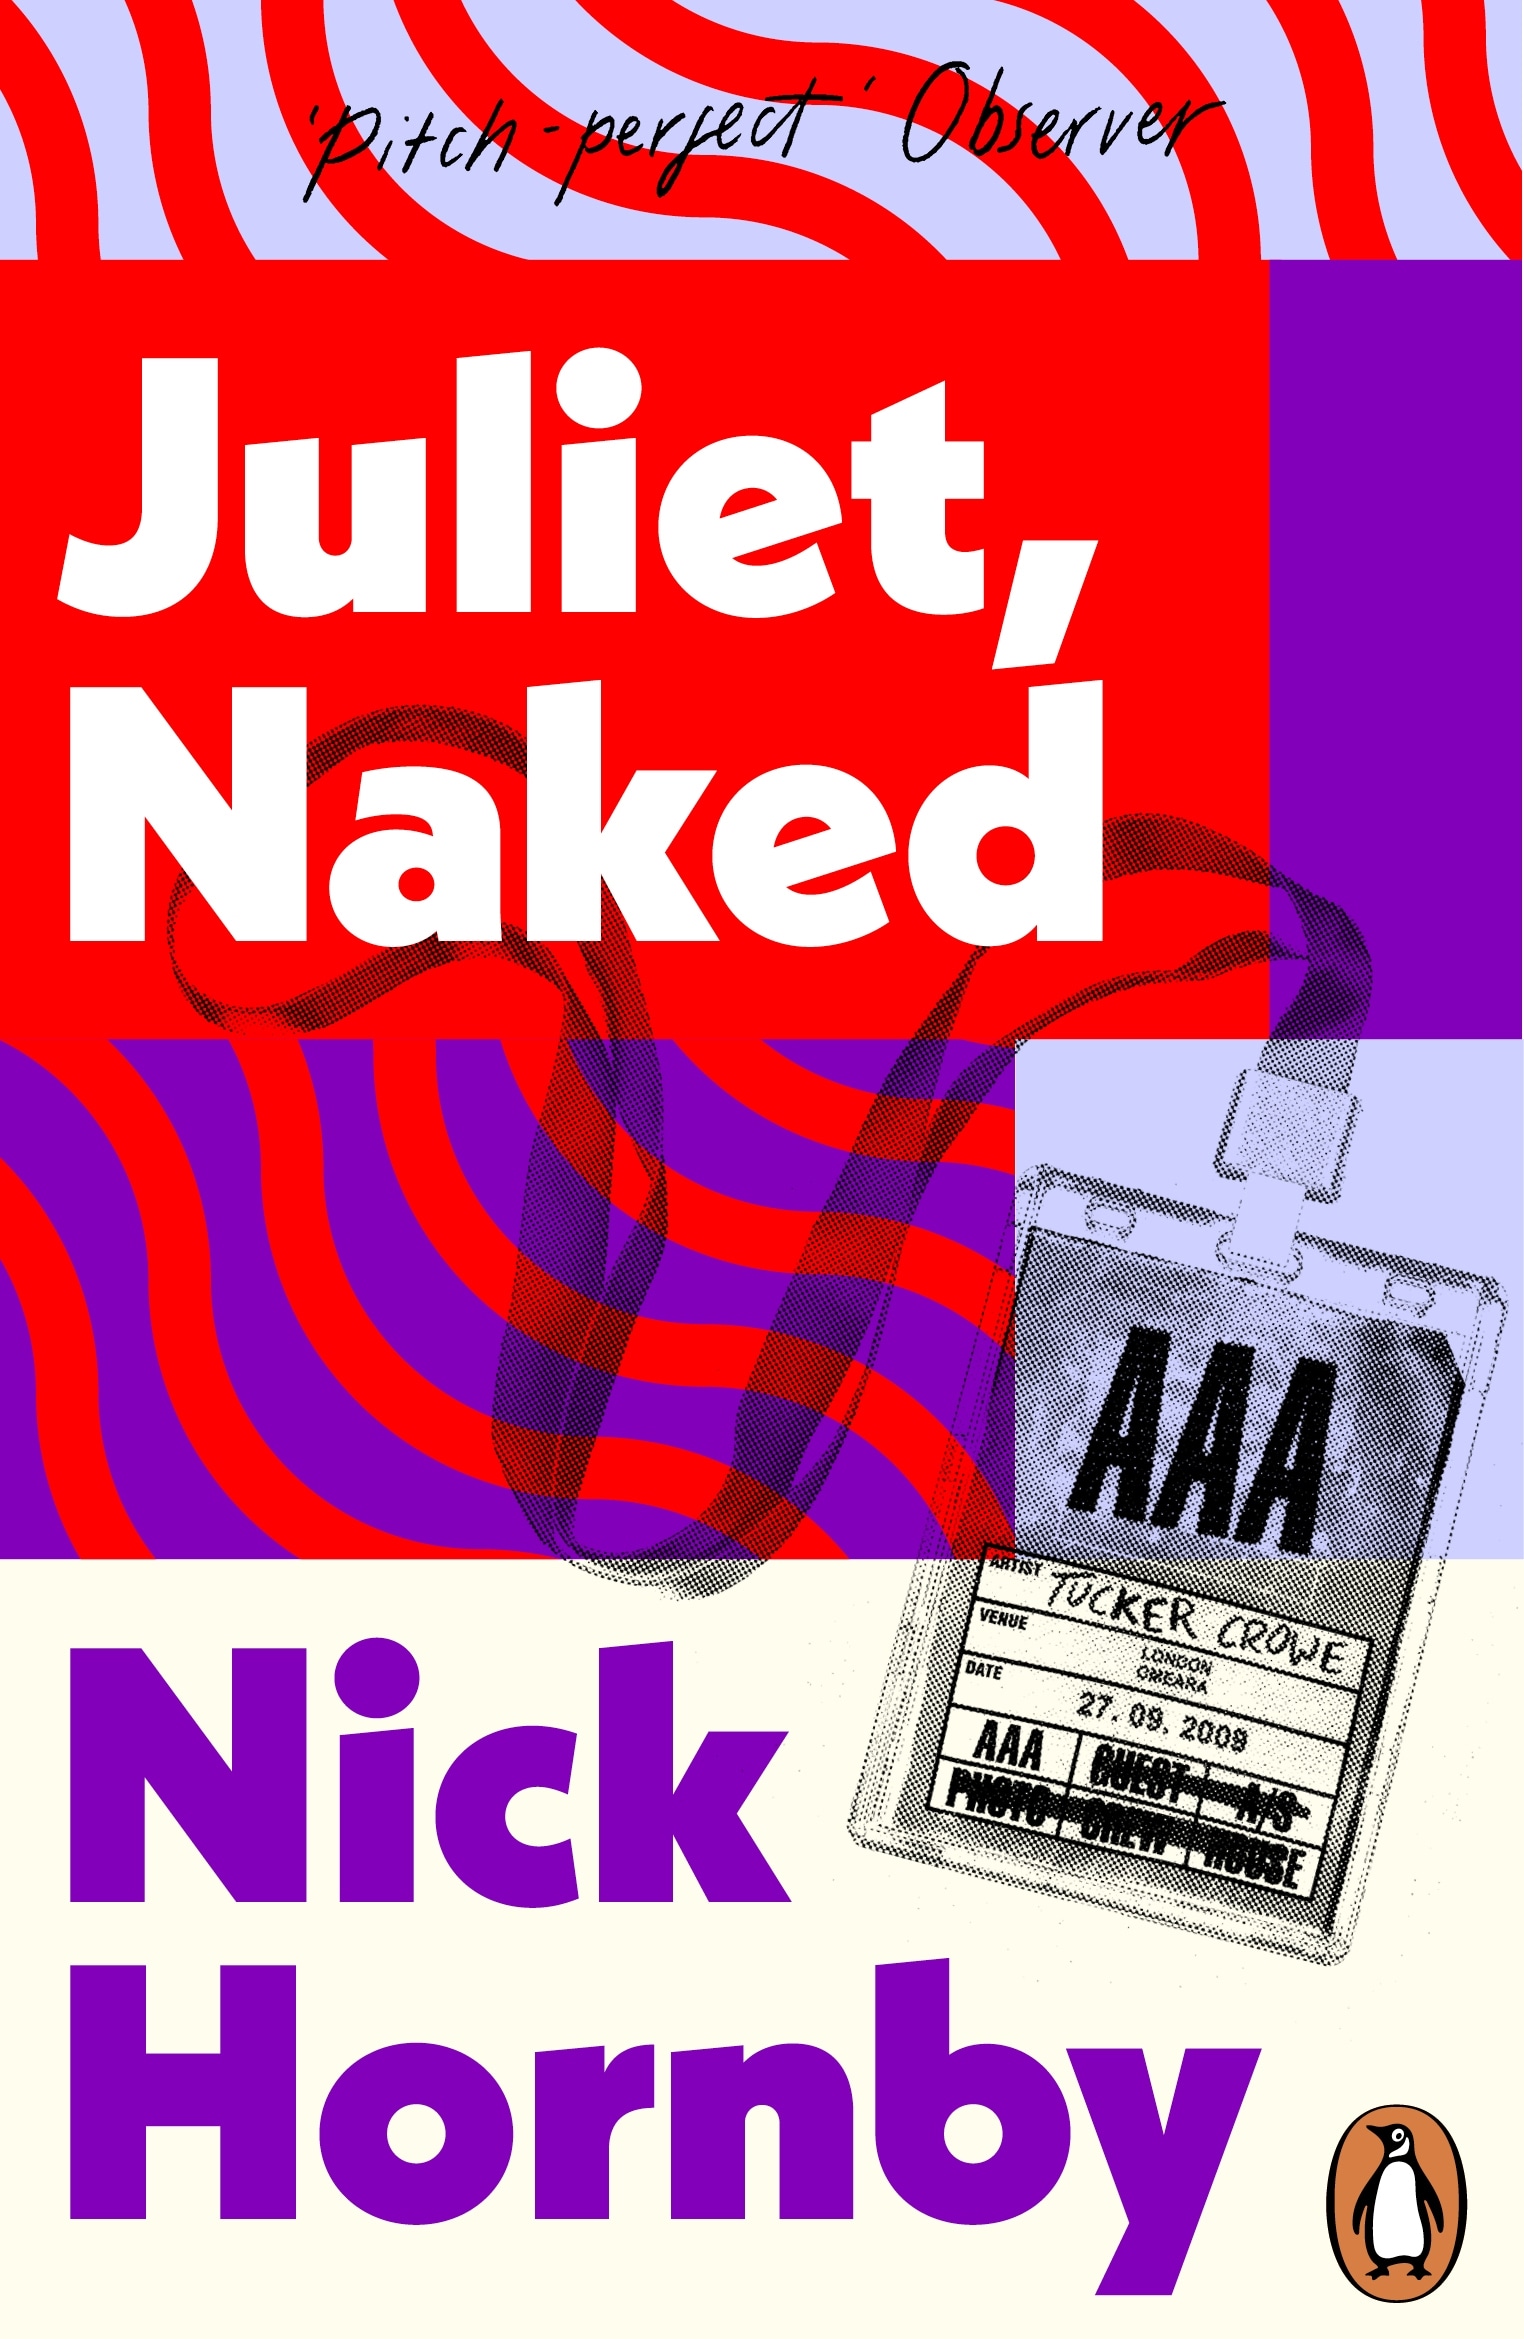 Book “Juliet, Naked” by Nick Hornby — January 2, 2014